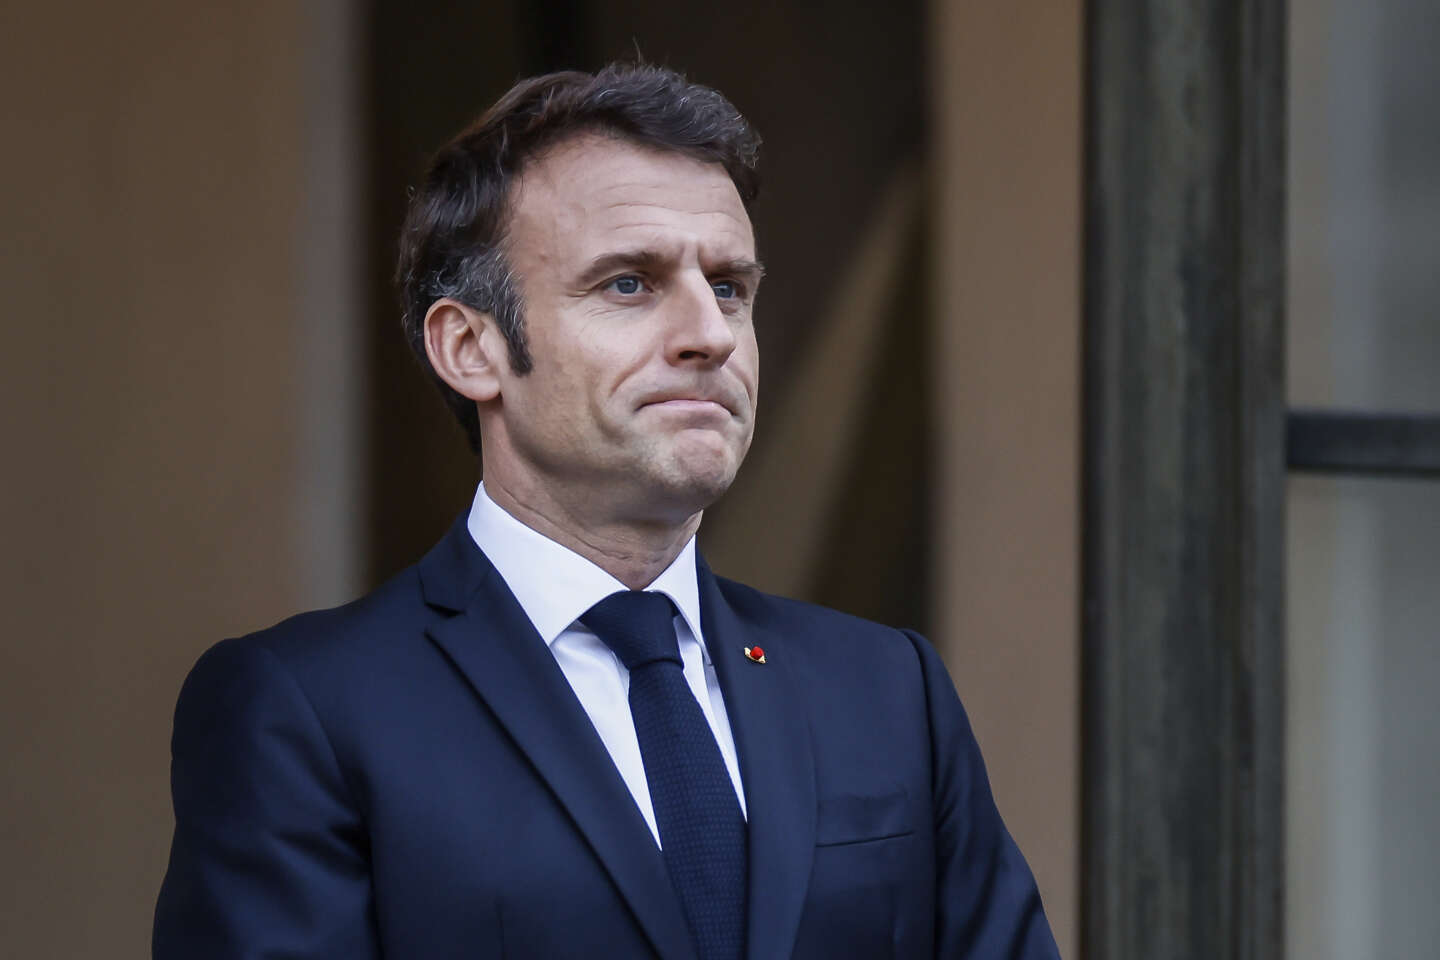 The pension crisis marks the end of “original macronism”